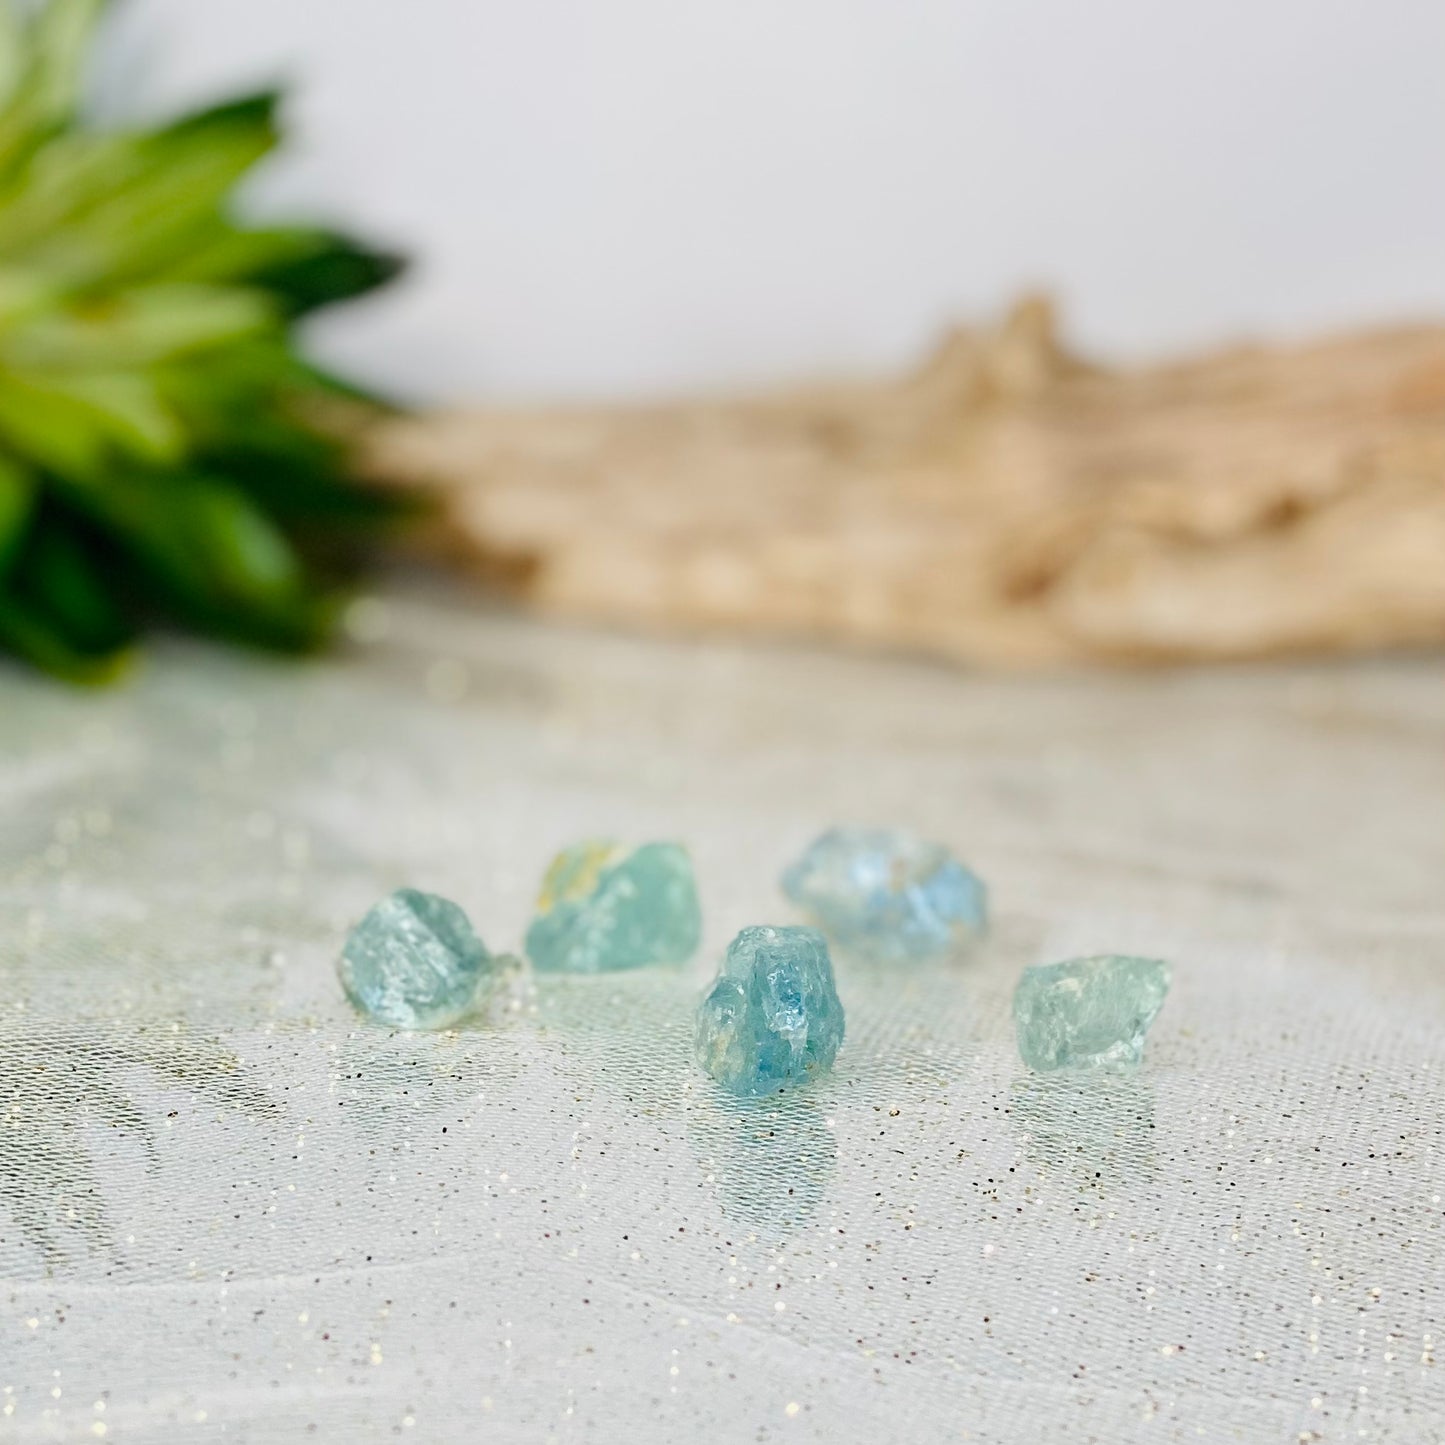 Raw Aquamarine Crystal Chunks: Tranquil Beauty from Earth's Depths